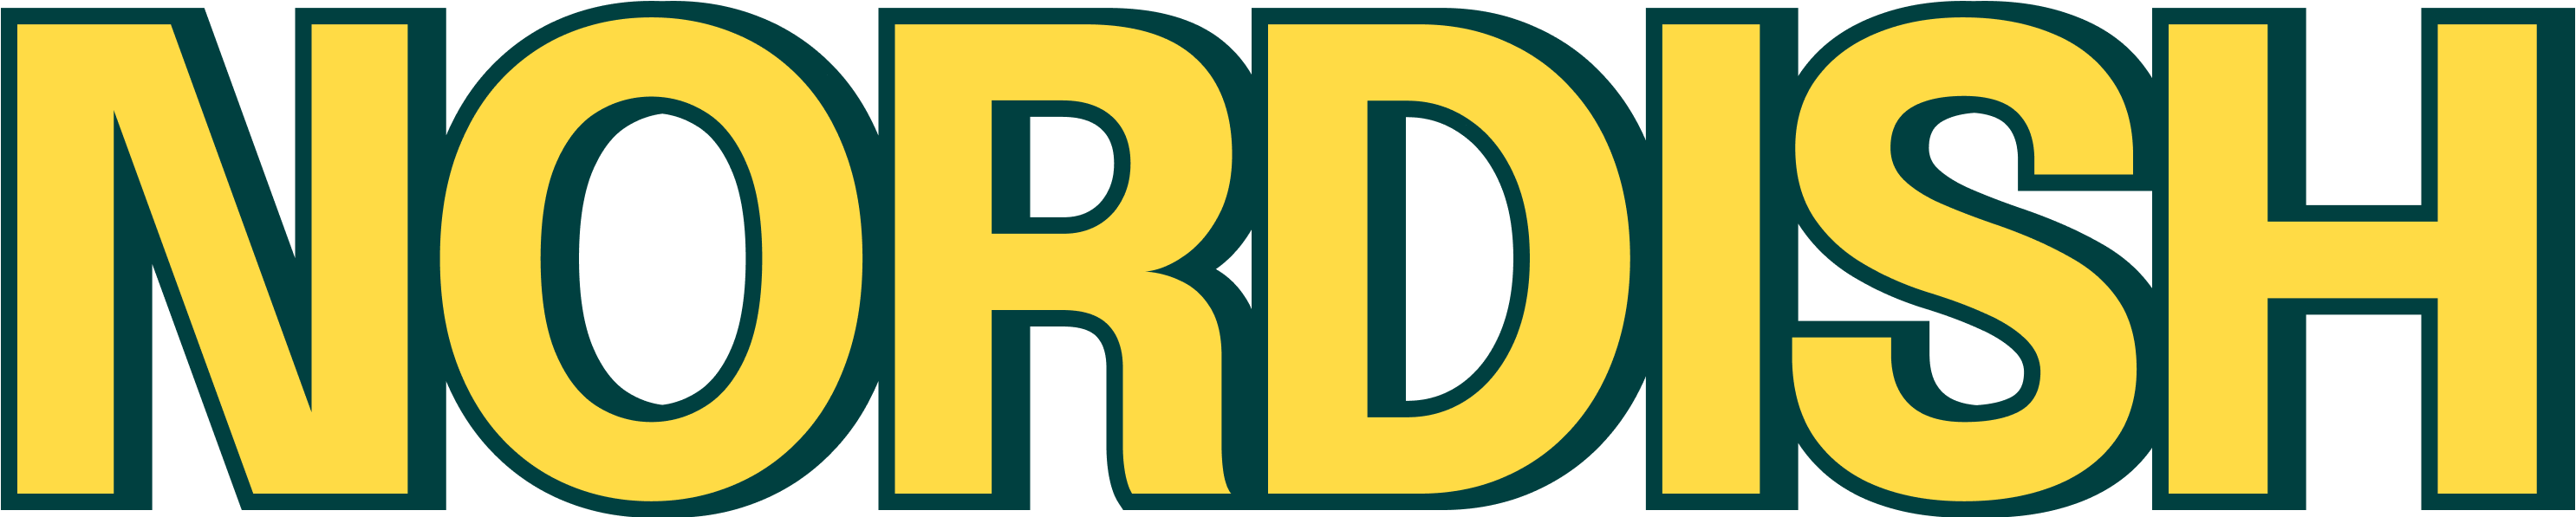 The word NORDISH in yellow with a green outline.